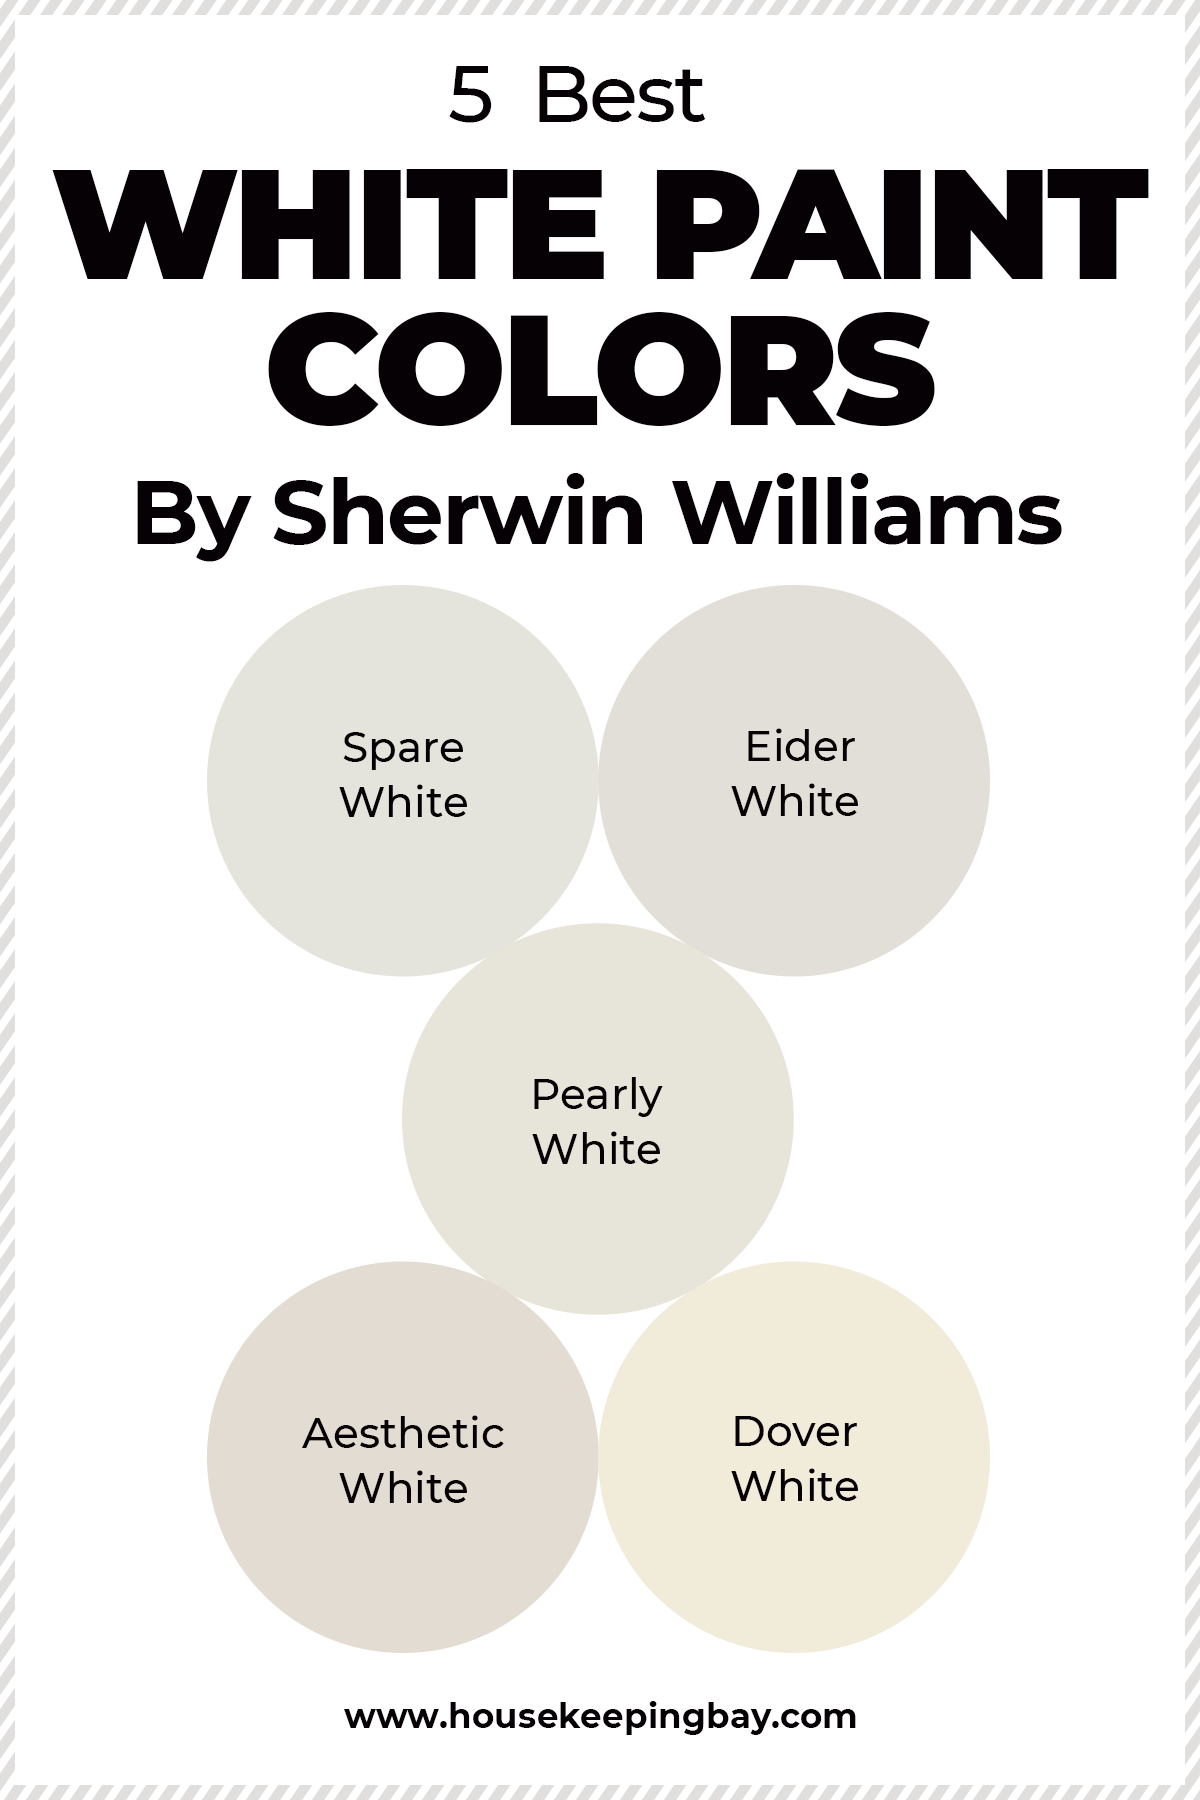 5 Best White Paint Colors by Sherwin Williams